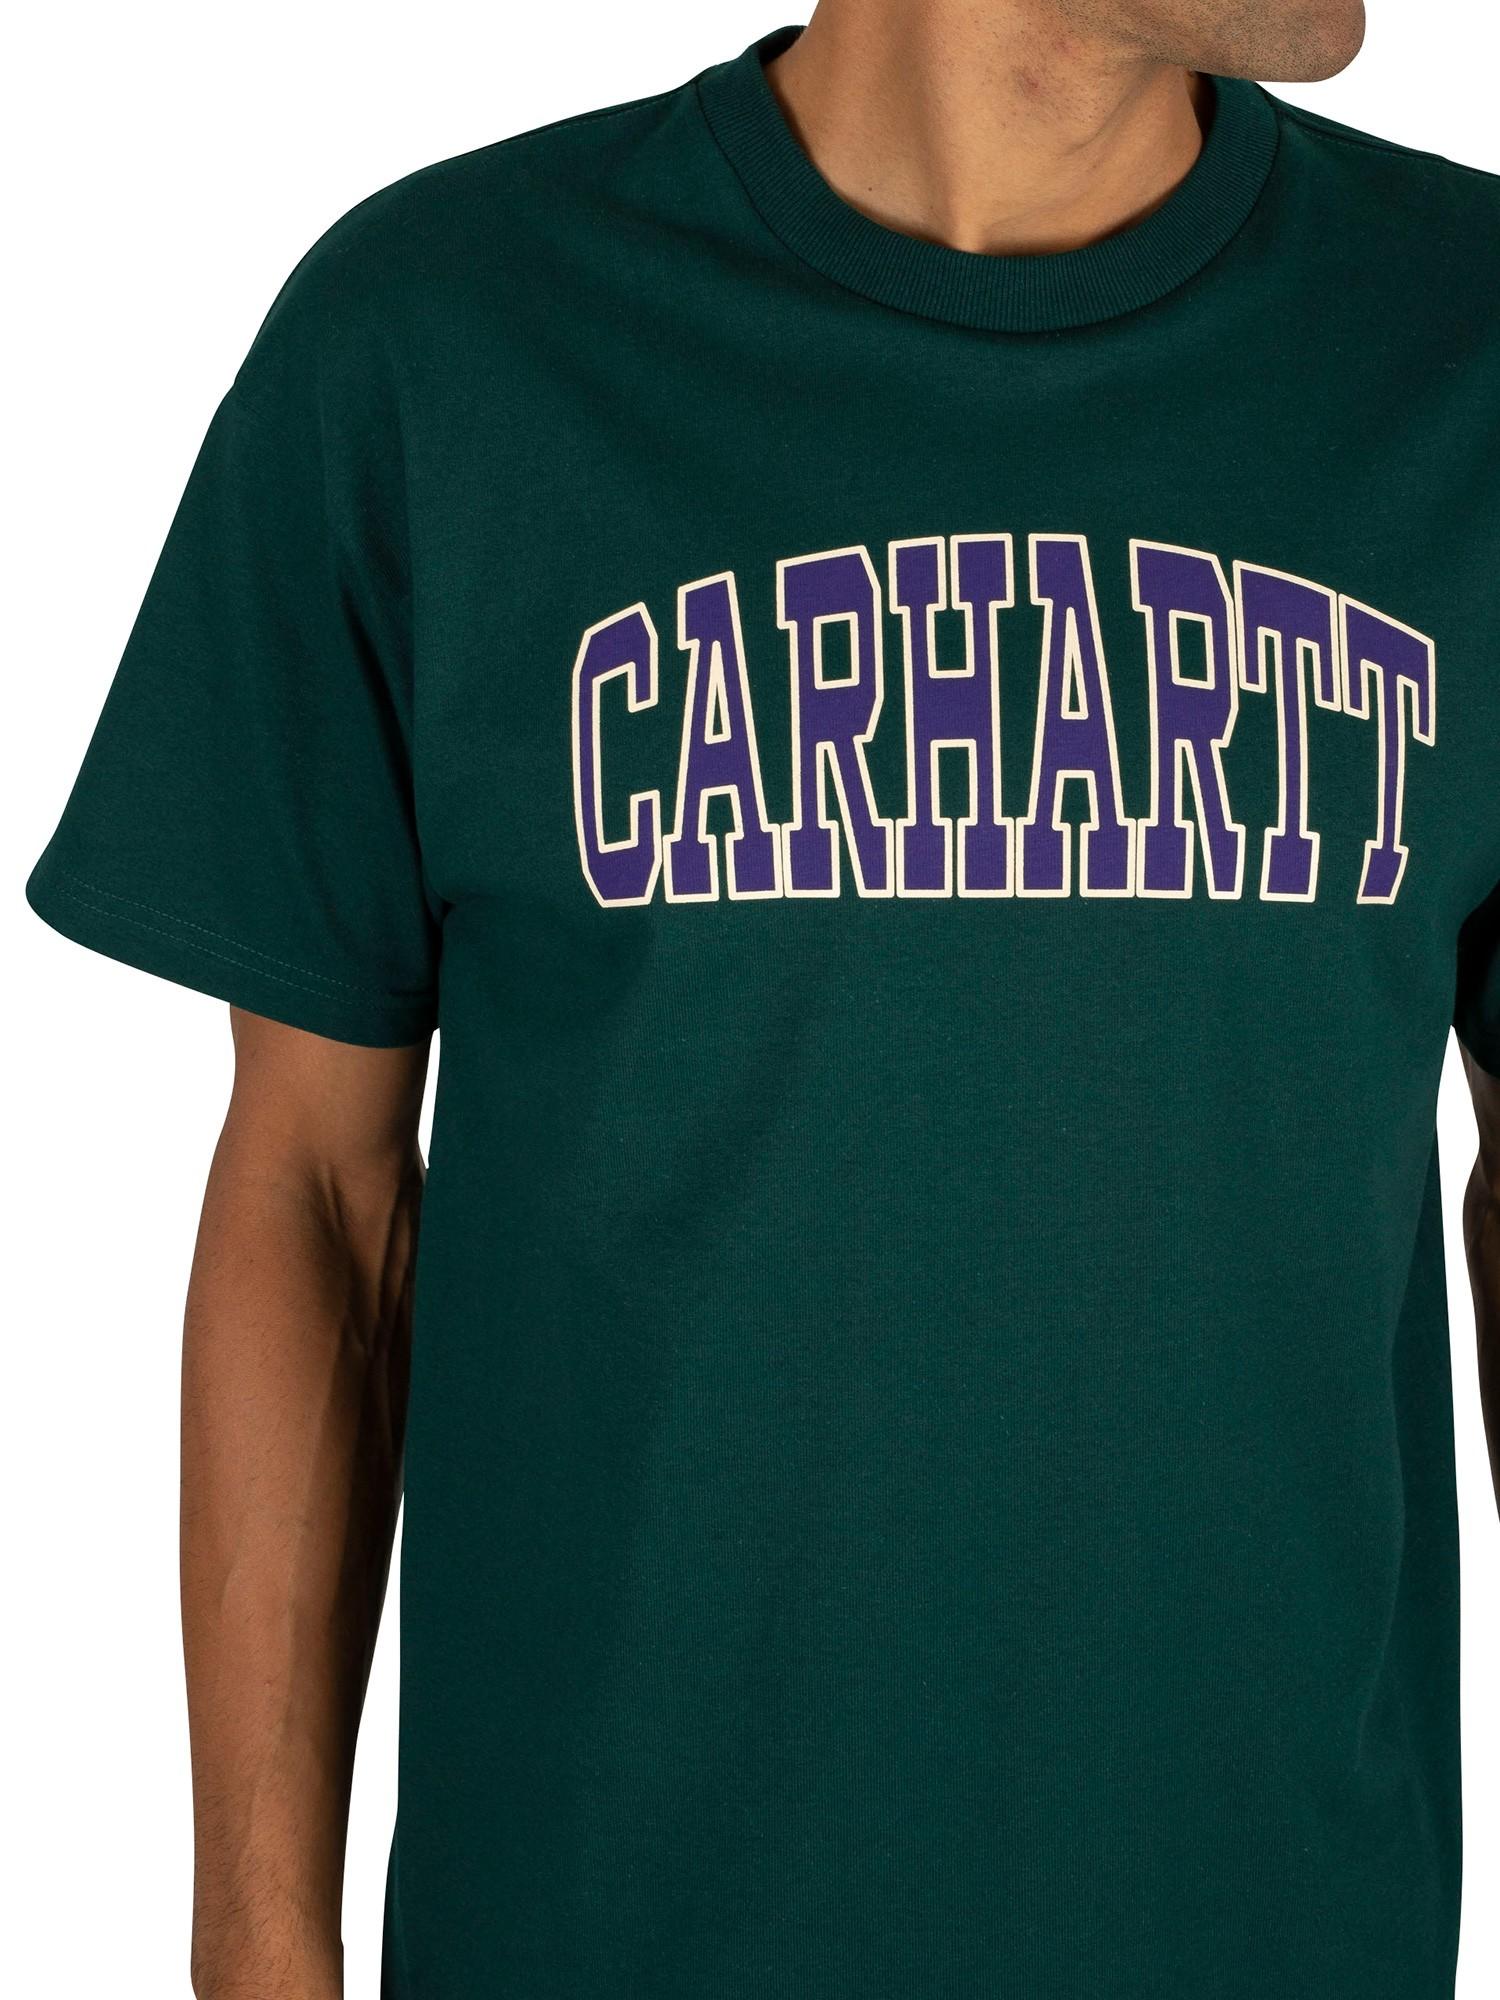 Carhartt WIP Cotton Theory T-shirt in Green for Men - Lyst